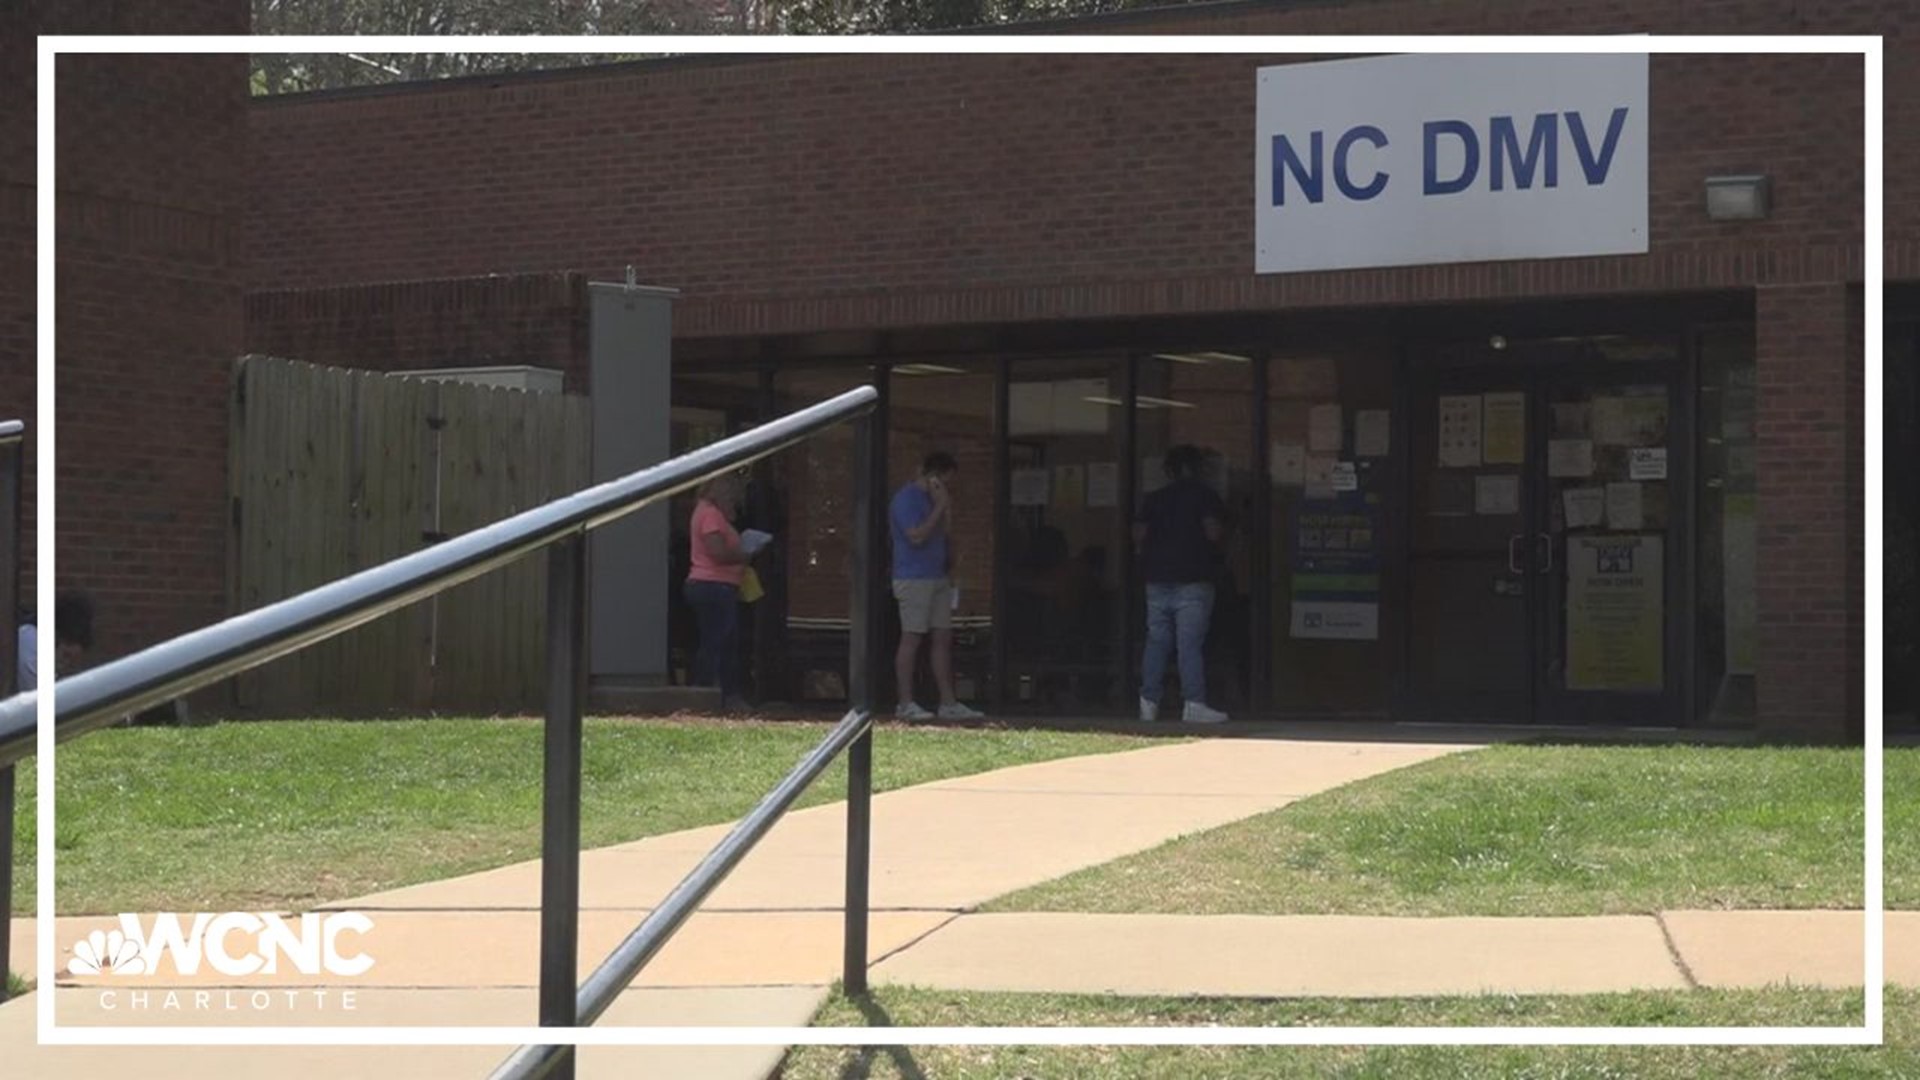 The DMV will require all drivers to confirm their appointments before showing up. It's the agency's latest move to improve service.